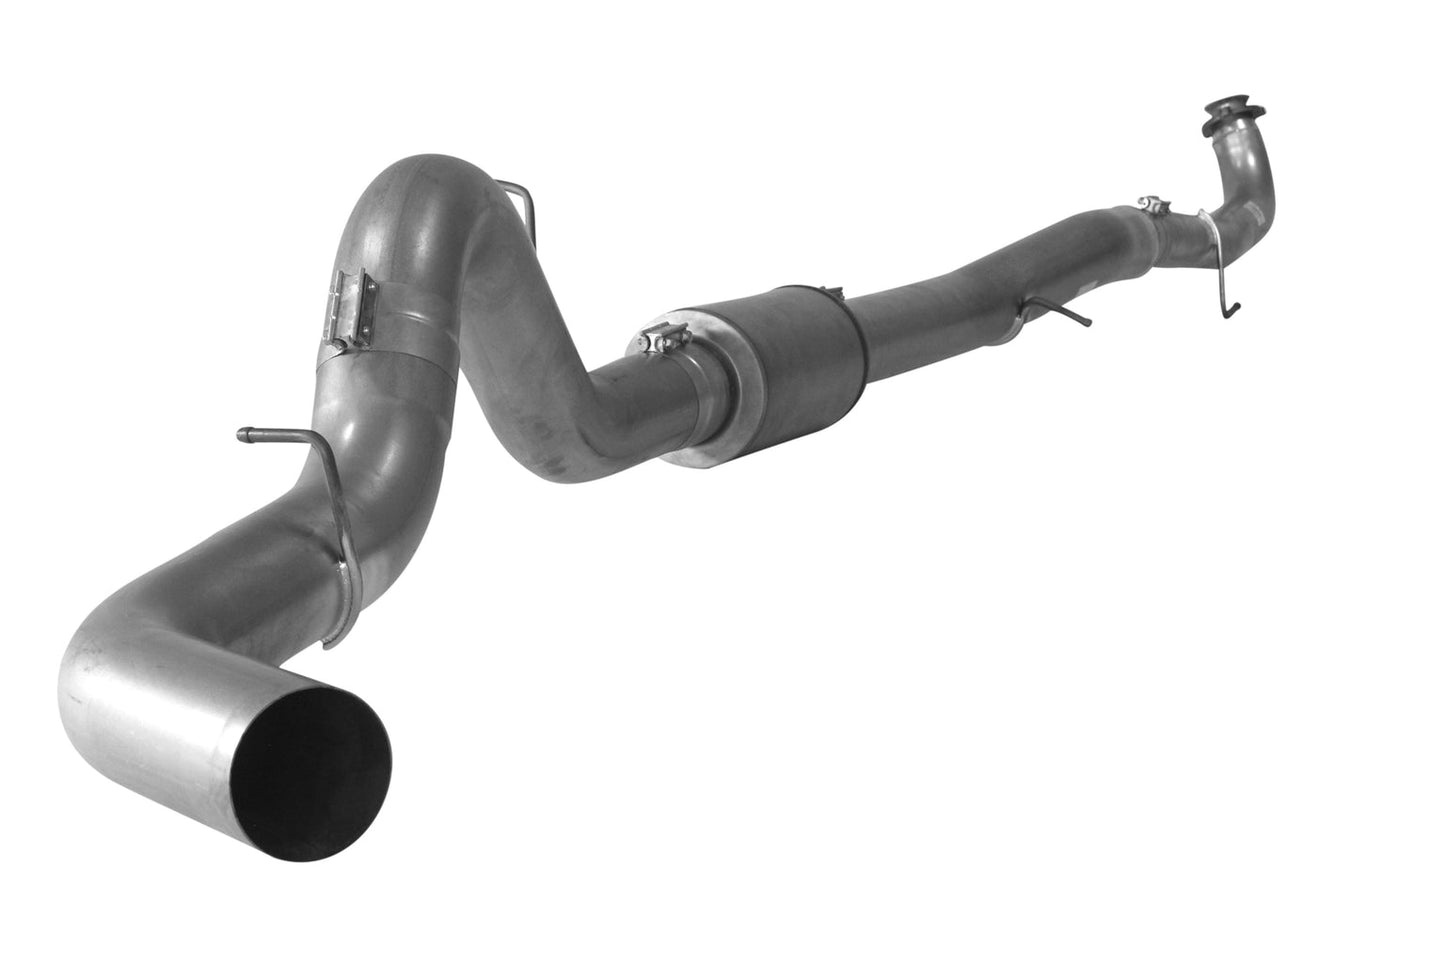 5" Downpipe Back Single | 2015.5-2016 GM 2500/3500 6.6L DURAMAX Exhaust Flo-Pro Stainless Muffler 